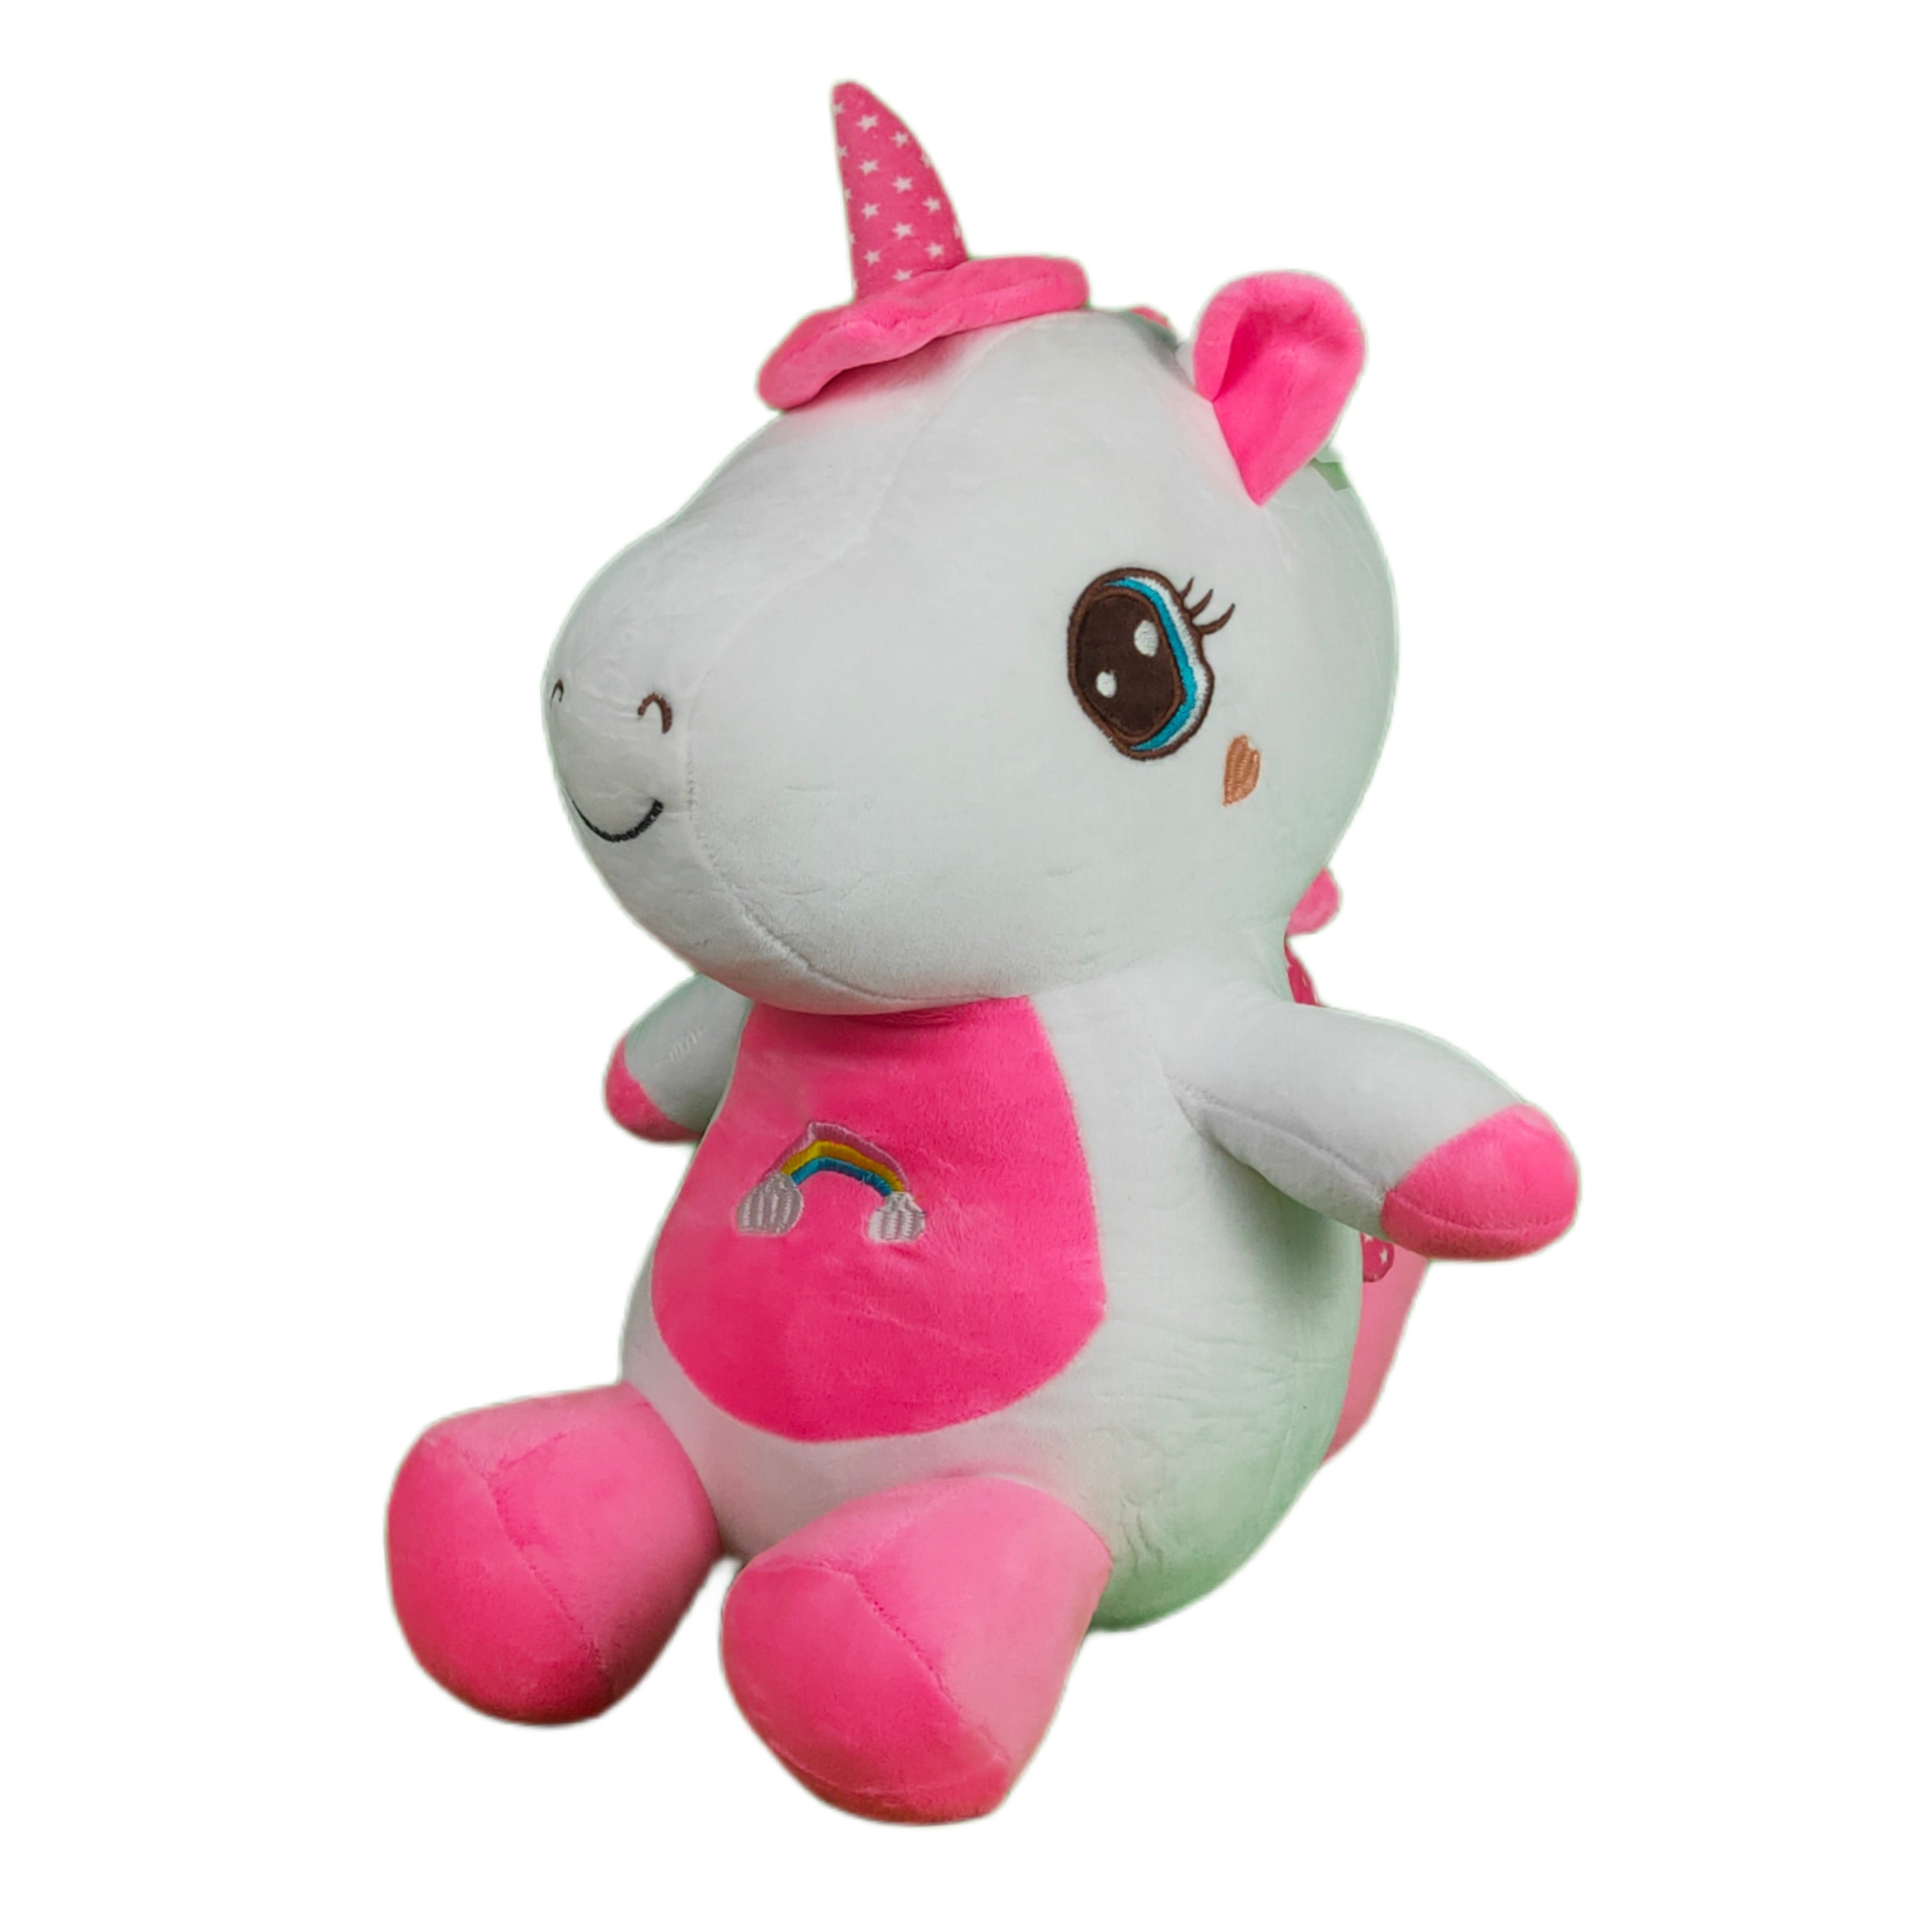 Play Hour Garcie The Unicorn Plush Soft Toy For Ages 3 Years And Up - Pink, 45cm